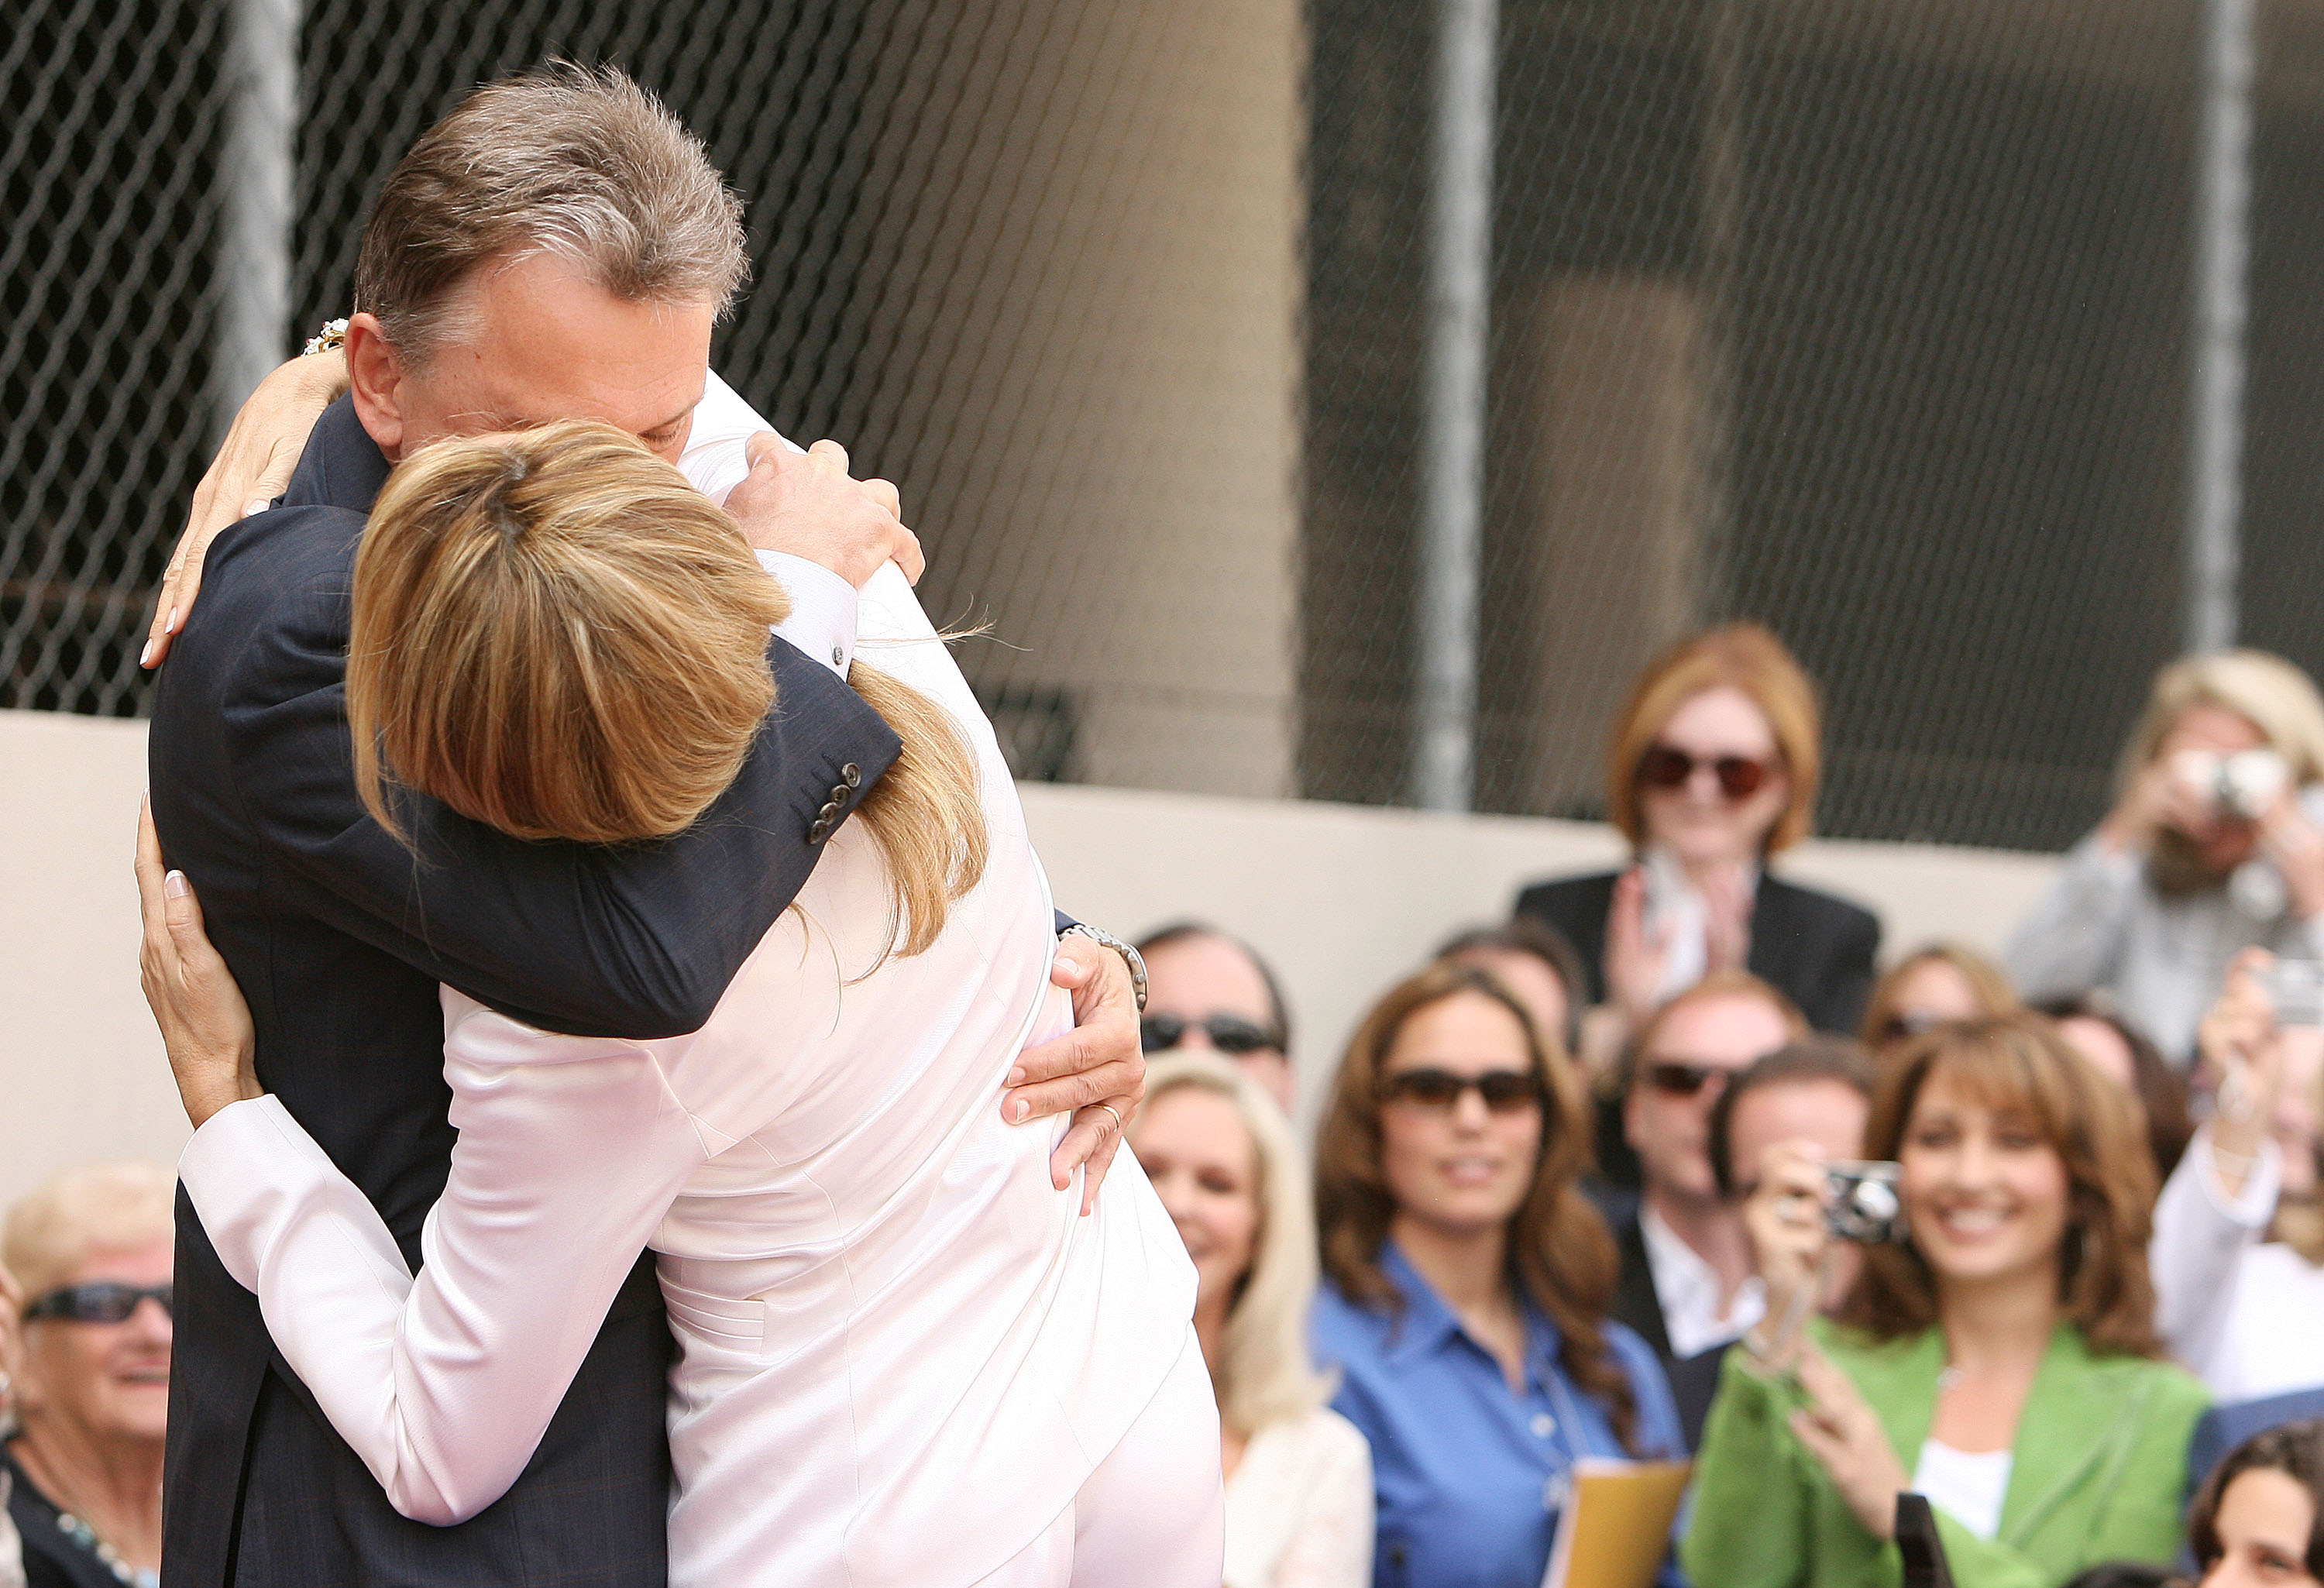 Pat Sajak embraces Vanna White during her honor ceremony, where she received a Star on the Hollywood Walk of Fame in California, 2006 | Source: Getty Images